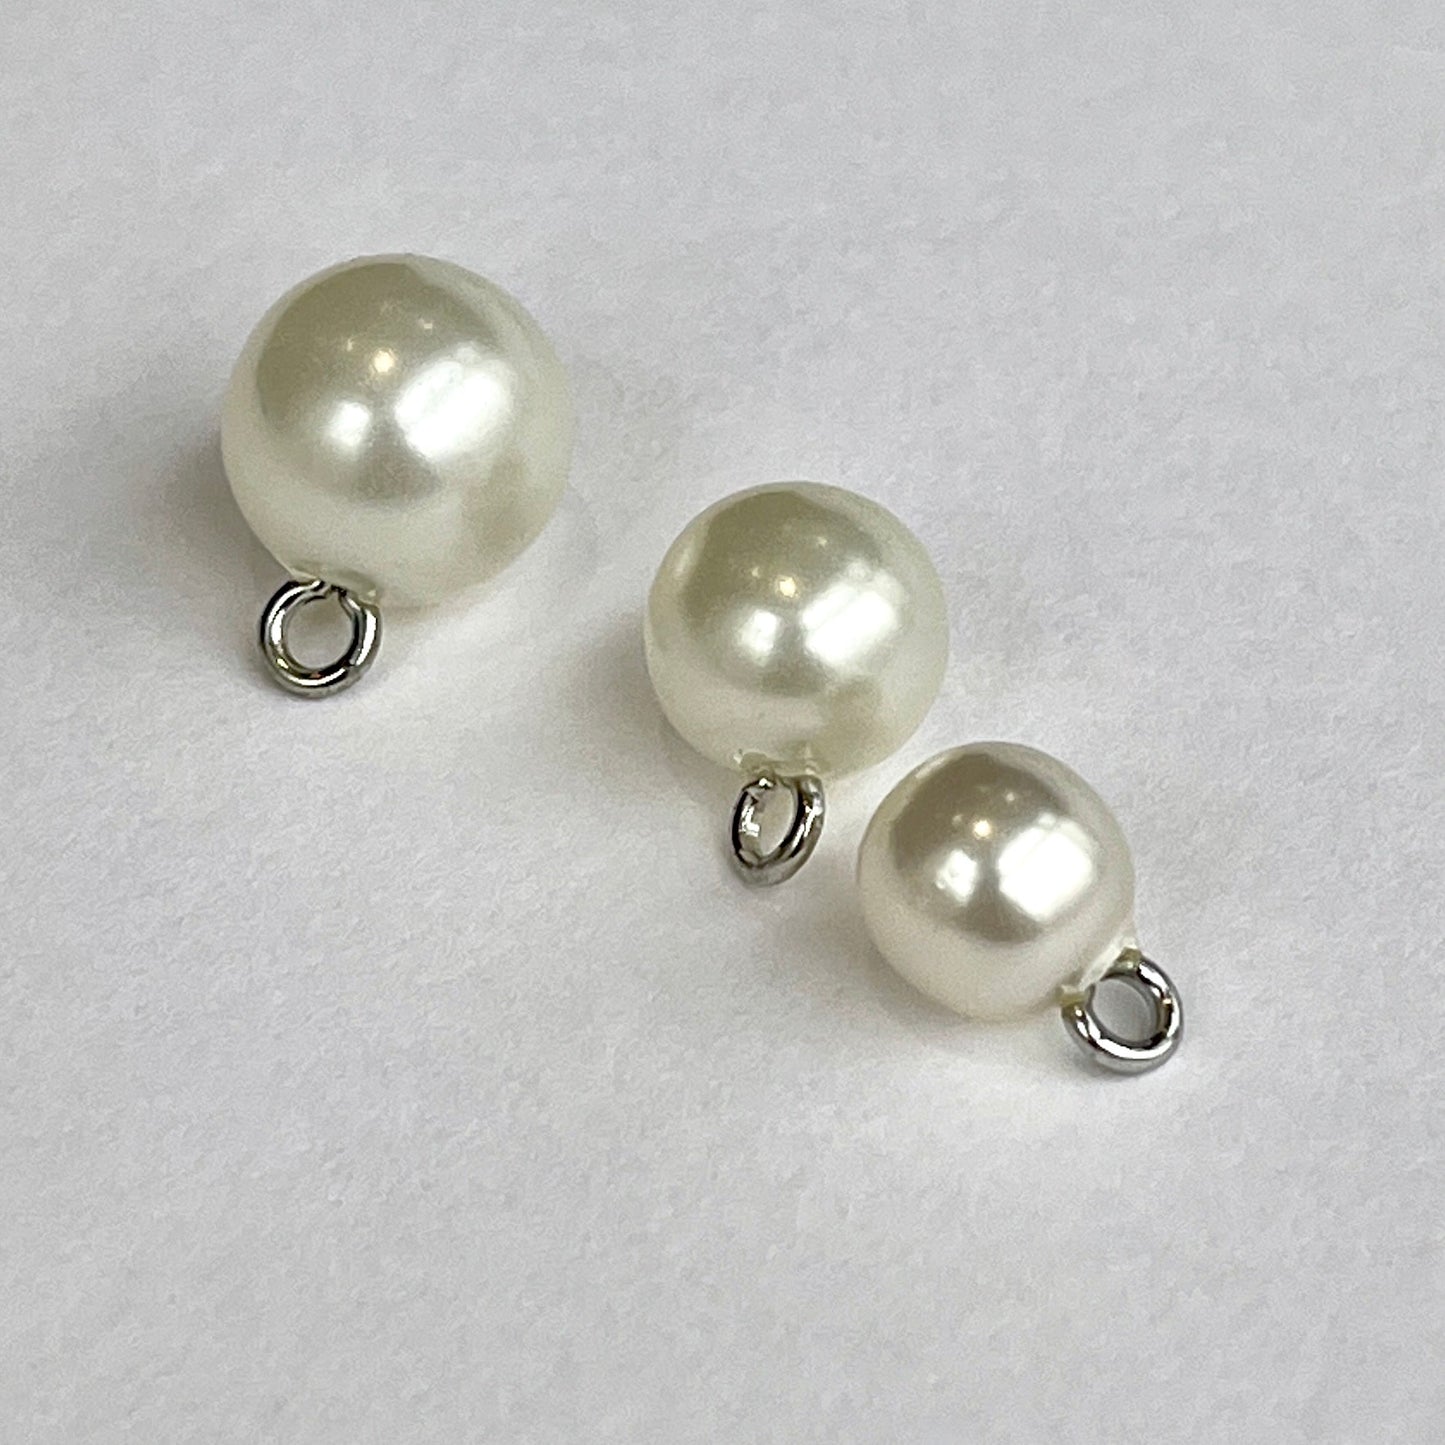 Pearl bridal ball buttons with metal shank perfect for bridal wear, baptism and Christening gowns or even a fancy cardi! Available in either white or ivory and 3 sizes. Close up image of 3 sizes of faux pearl buttons.